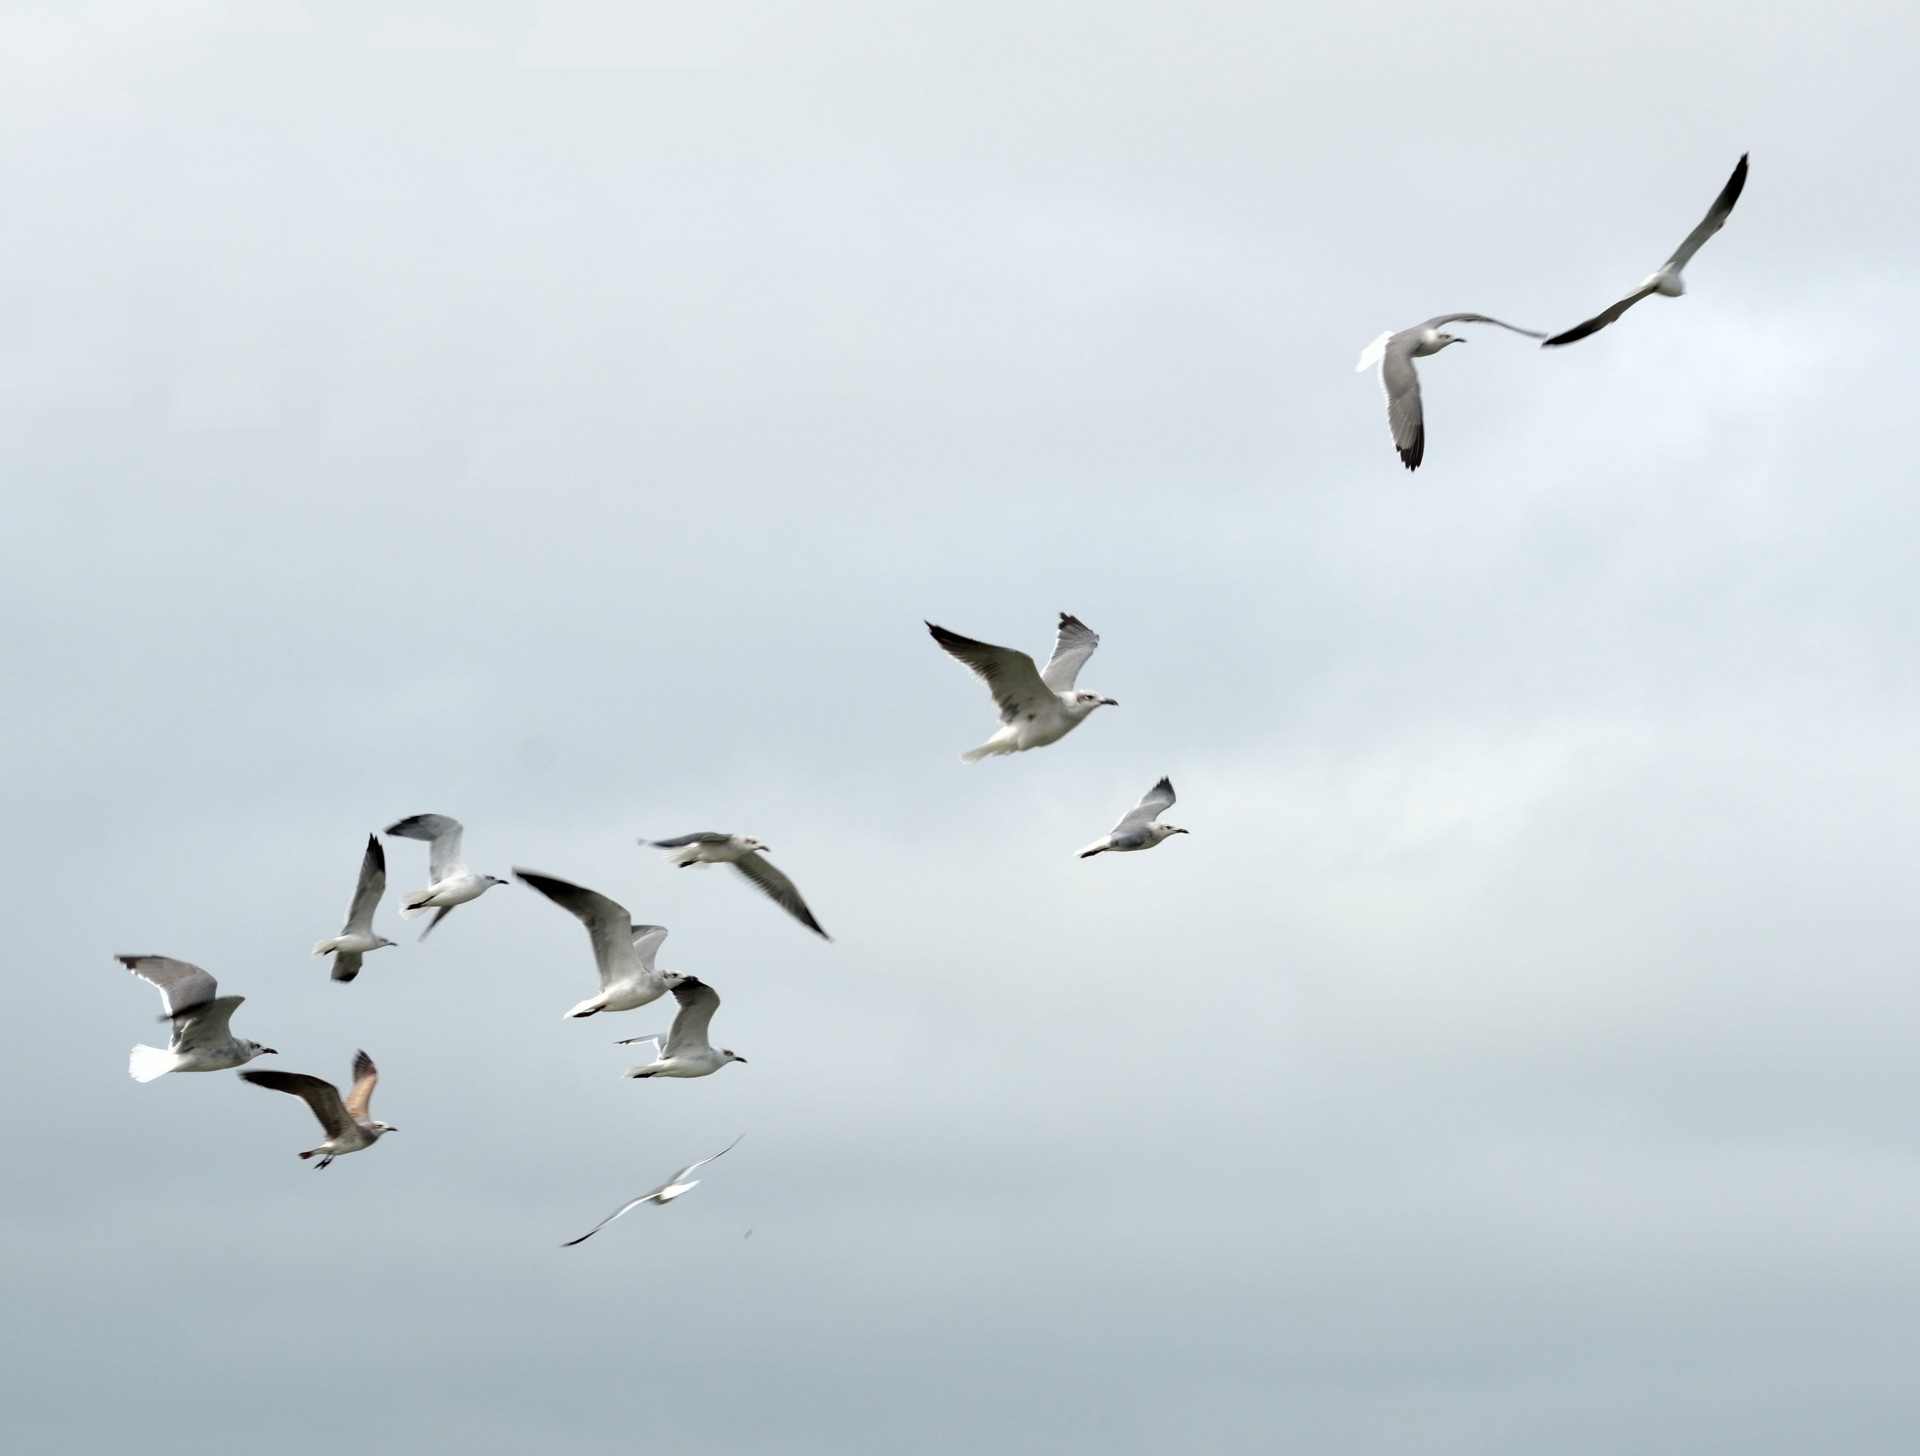 Seagulls Flying Free Stock Photo - Public Domain Pictures